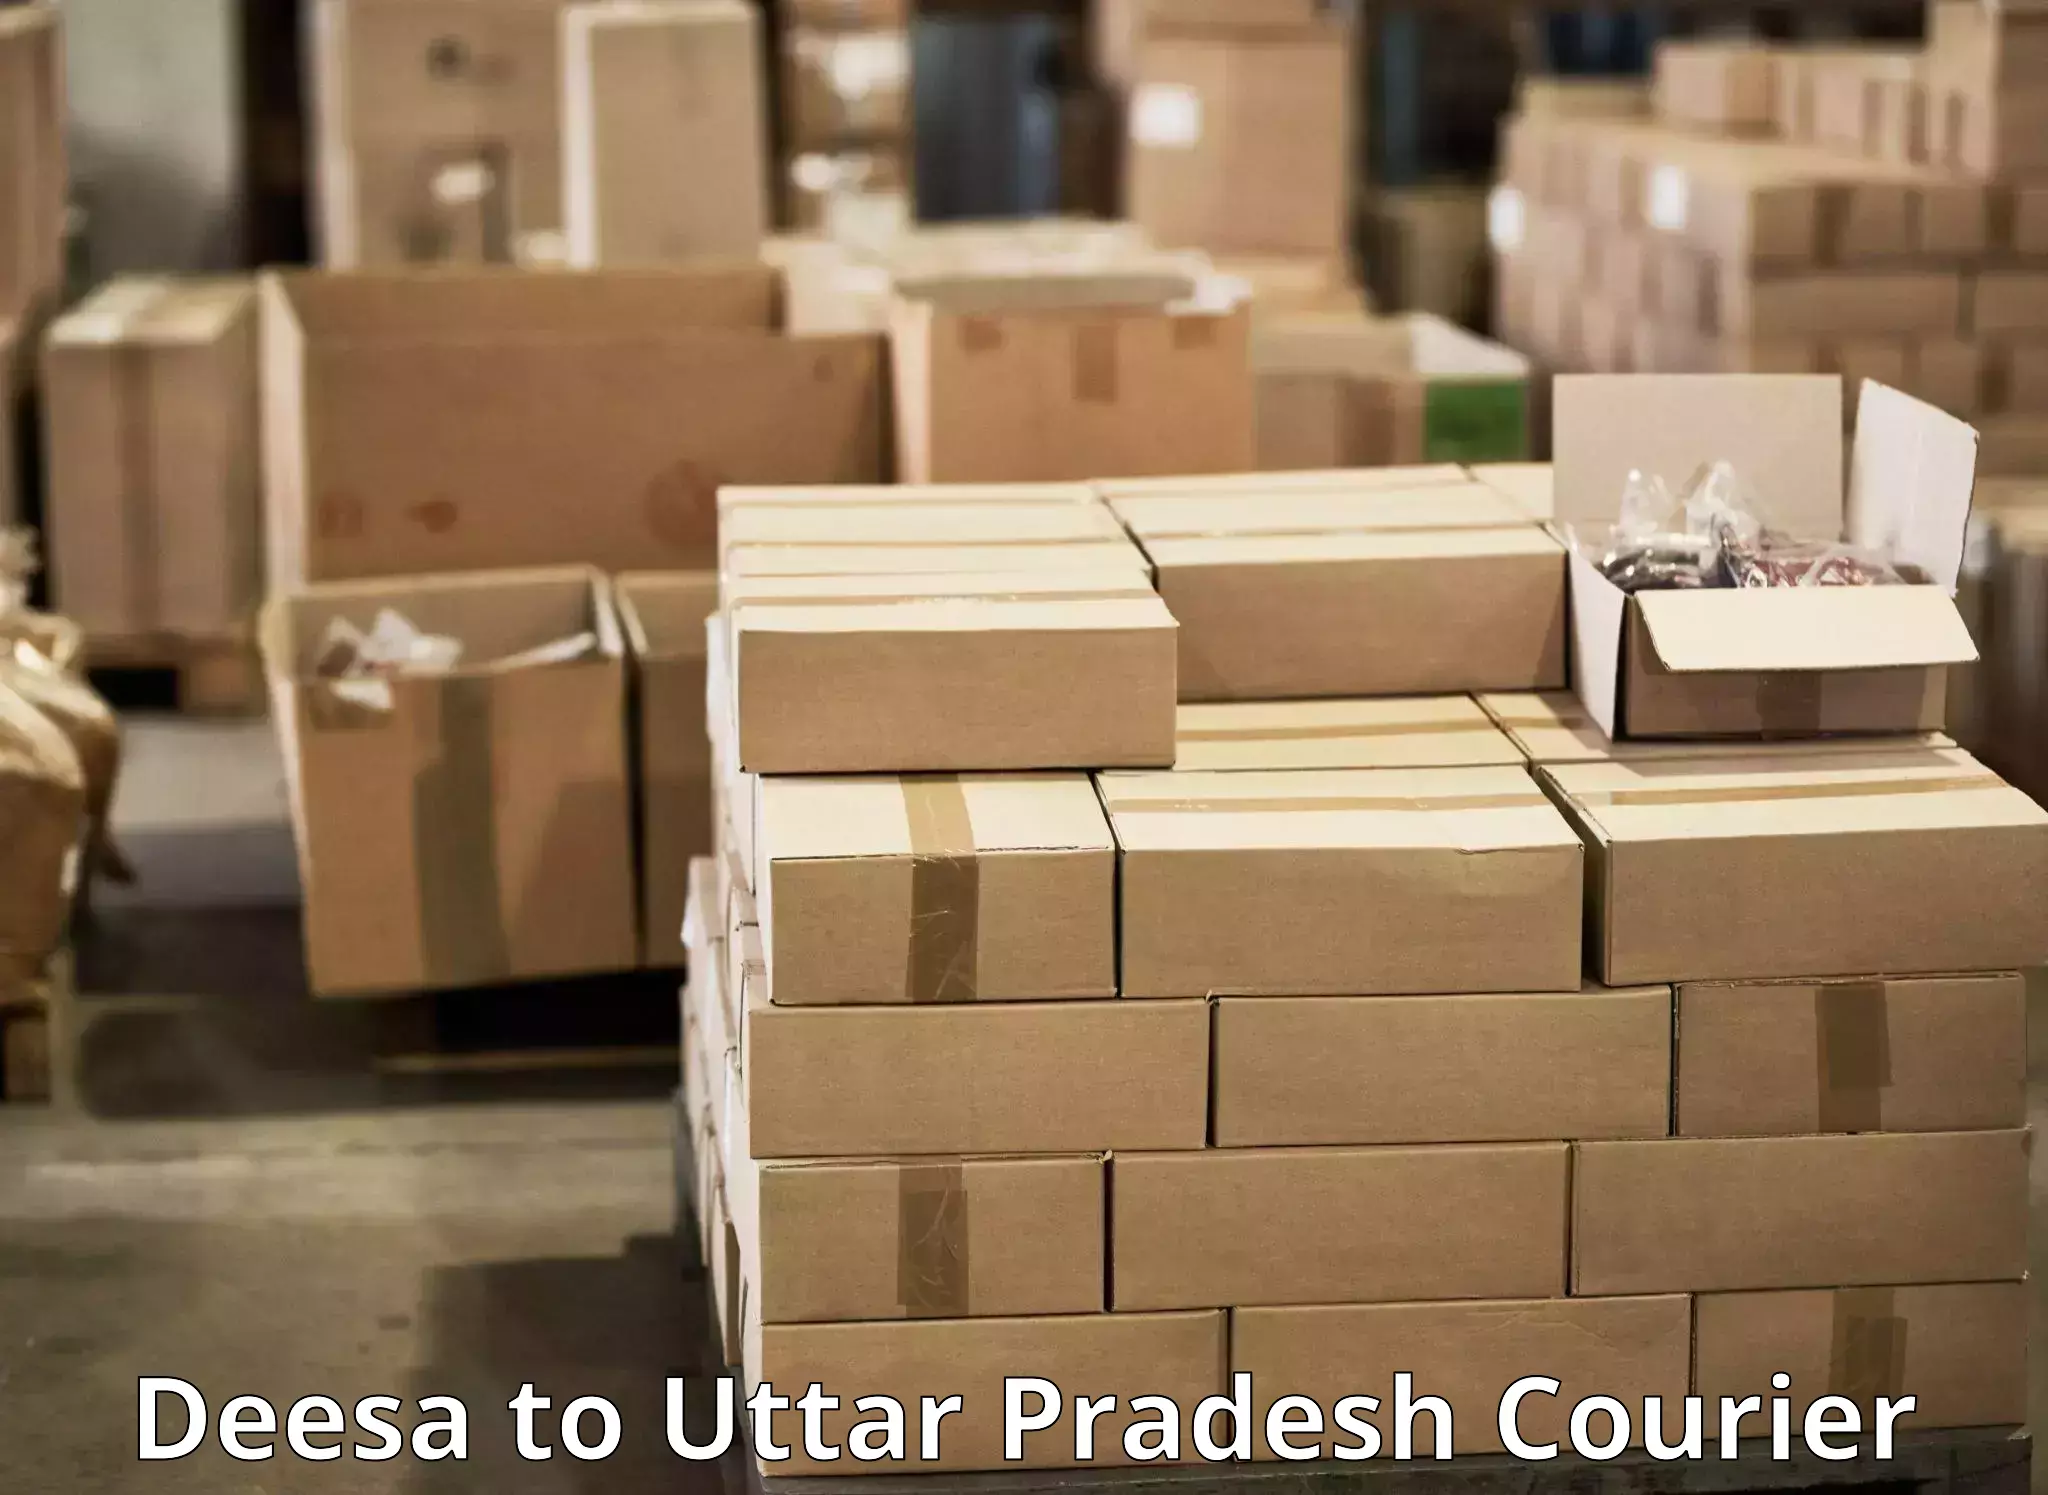 State-of-the-art courier technology Deesa to Itava